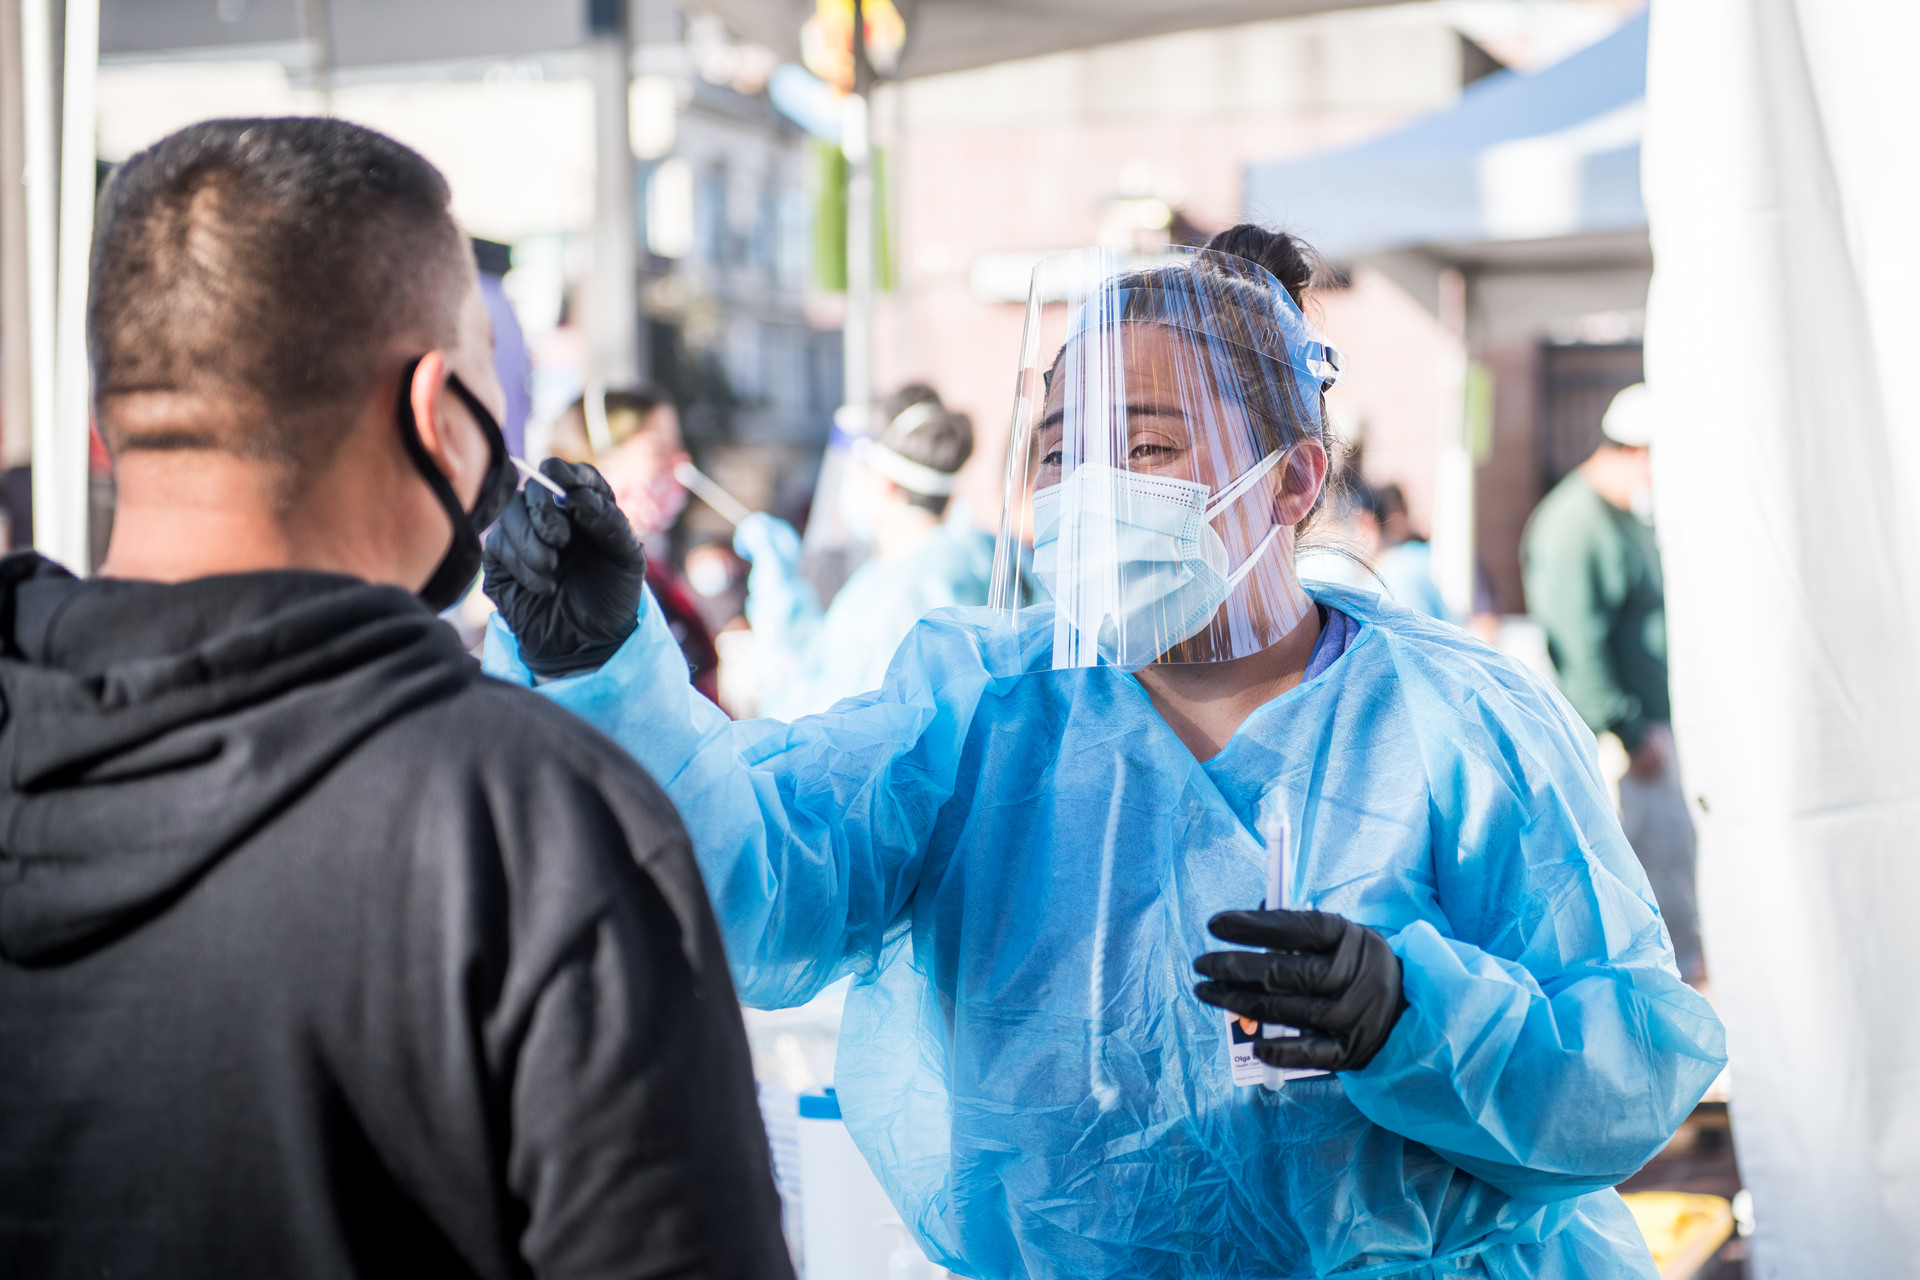 nurse in full PPE prepares to swab man wearing a mask facing away from camera, outside in sunlight